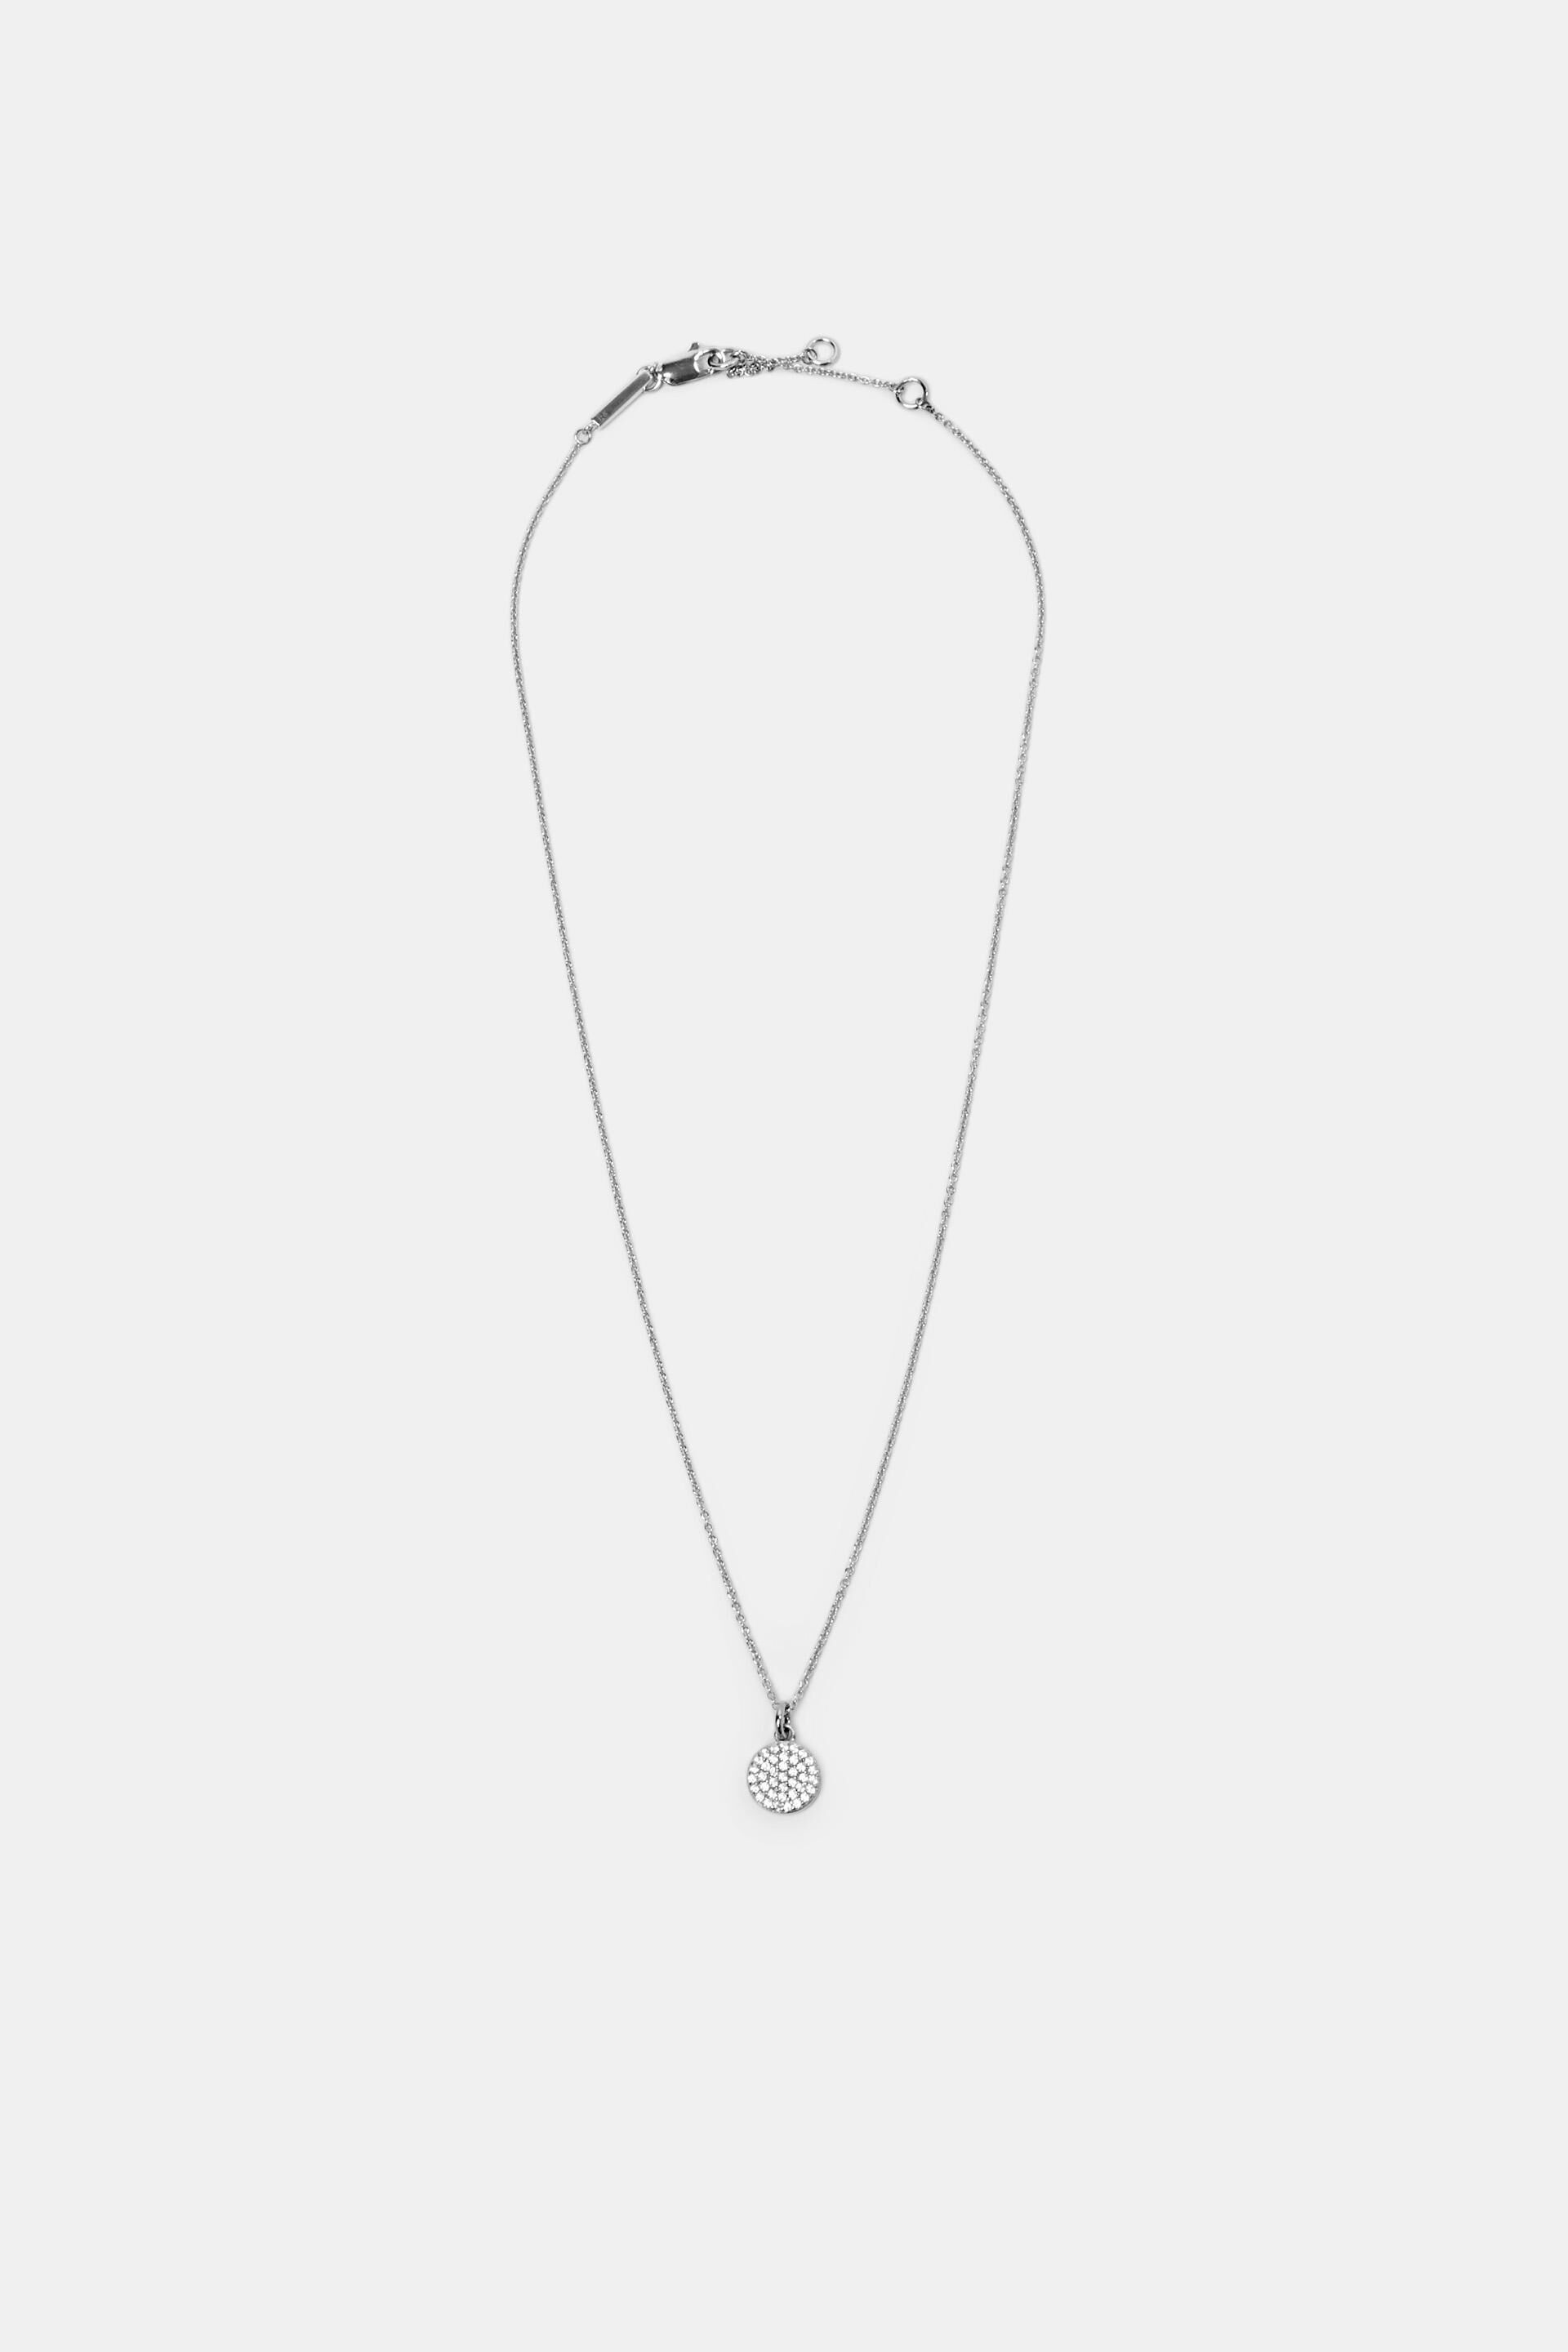 Esprit Necklace sterling silver pendant, zirconia with